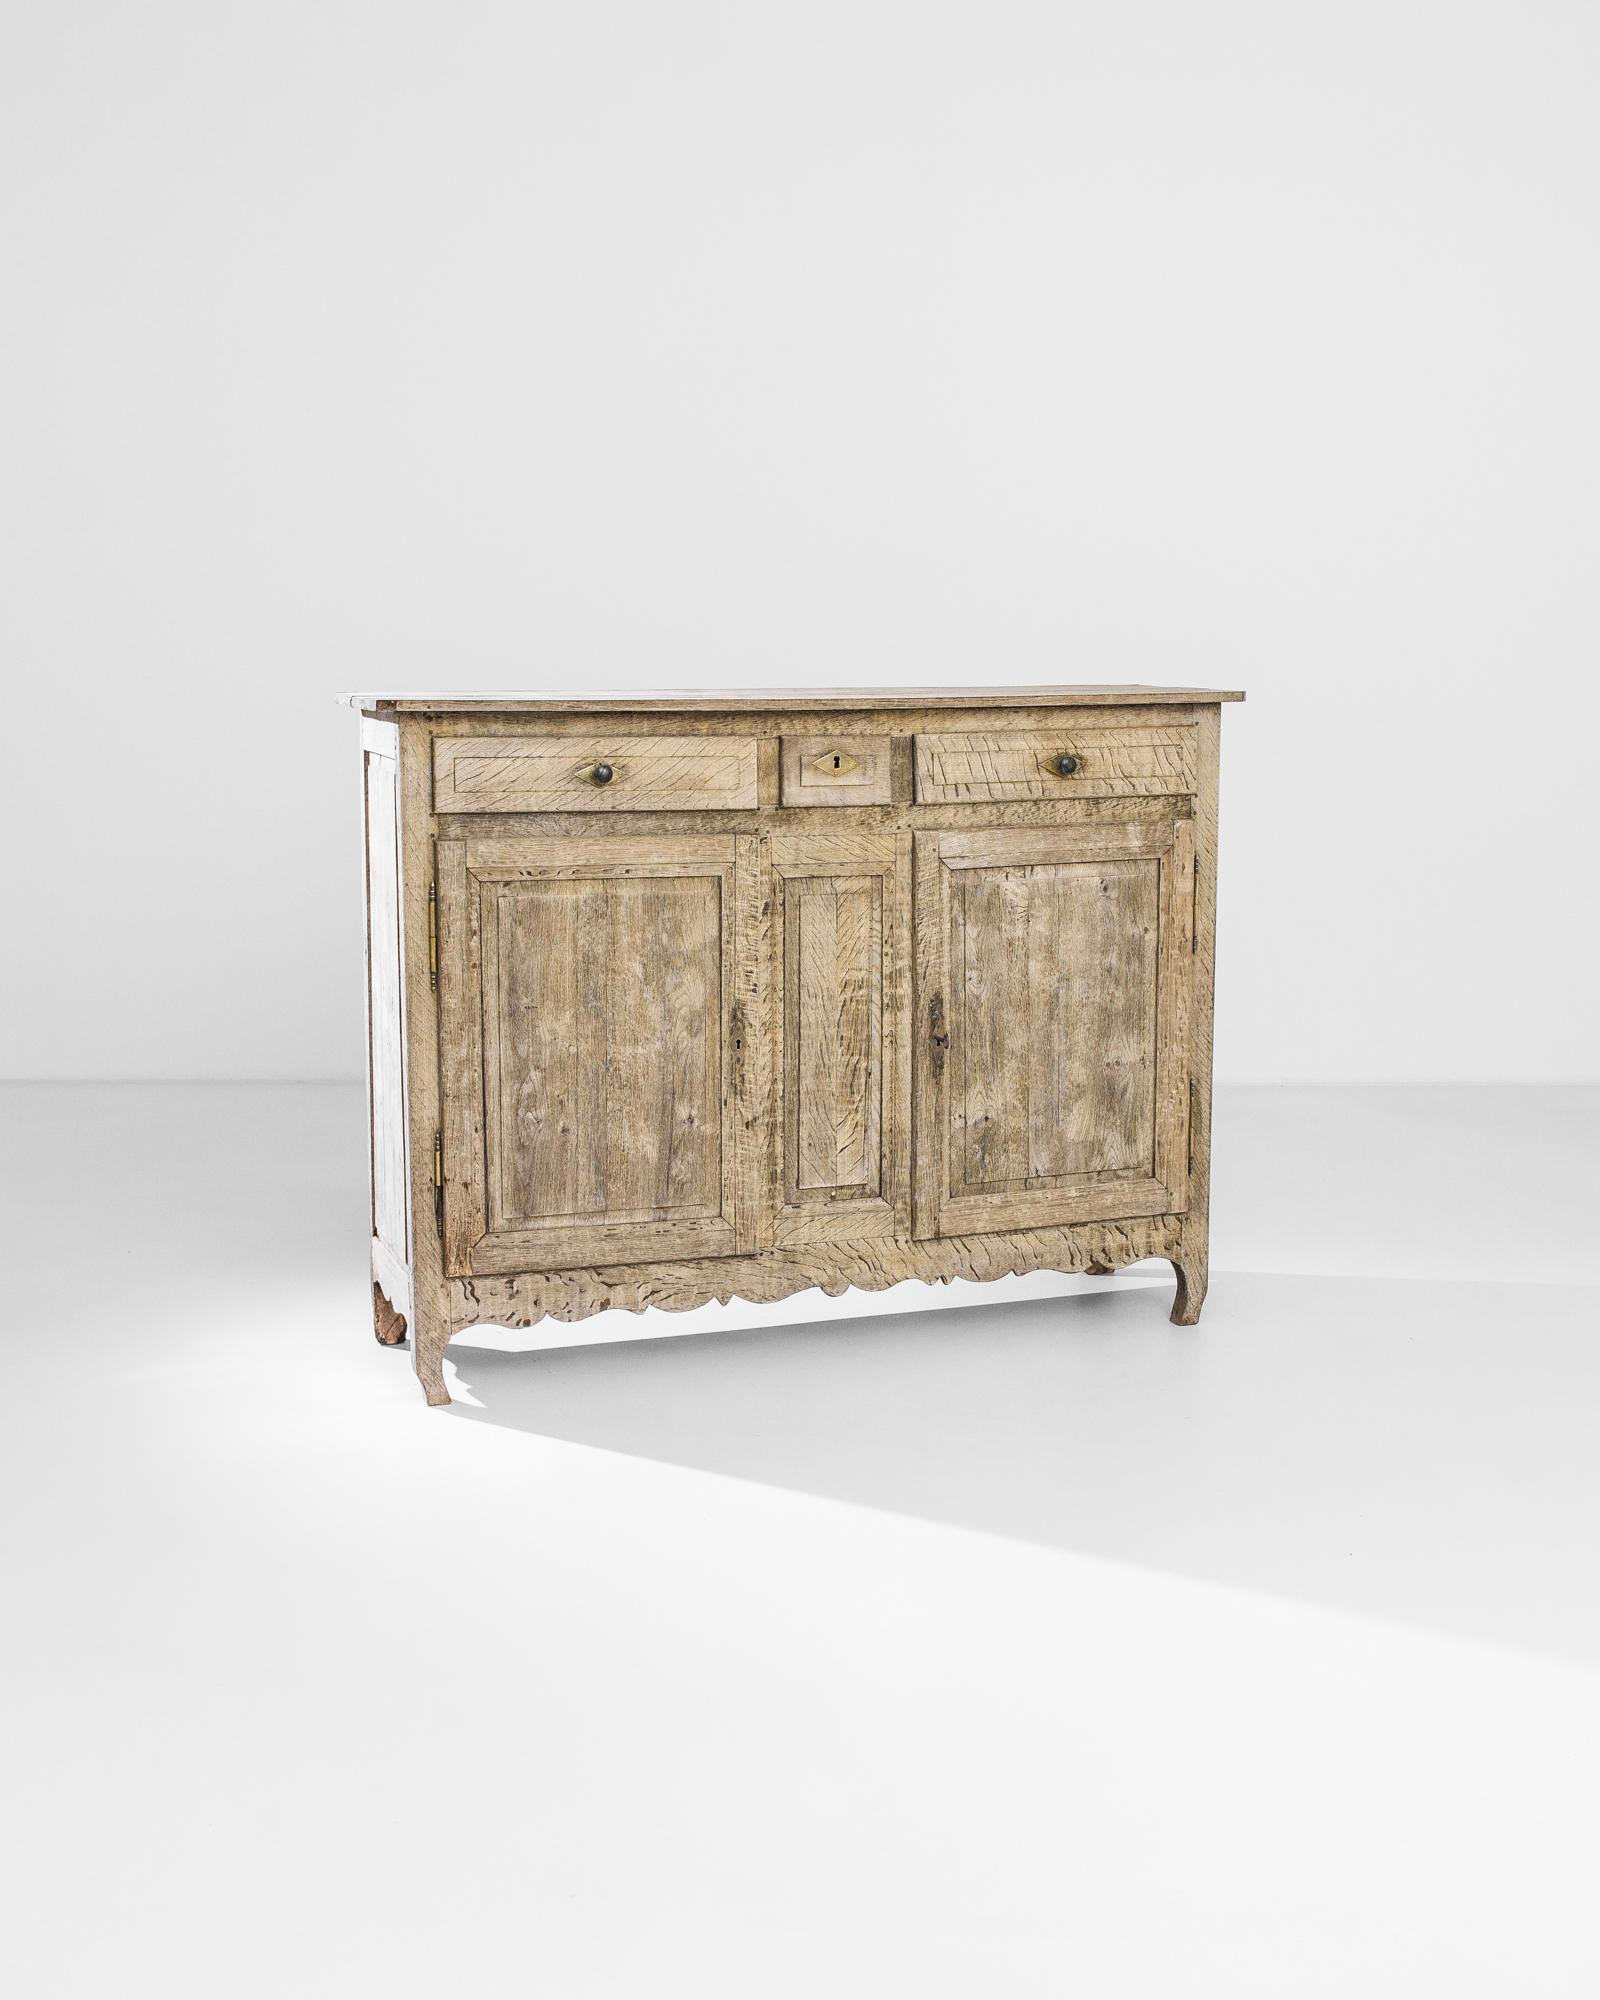 A bleached oak buffet from France, produced circa 1860. This french country style cabinet, features three sliding drawers, a locking double cabinet of two shelves, and squat cabriole front legs. A prominent wood grain takes centerstage as the main